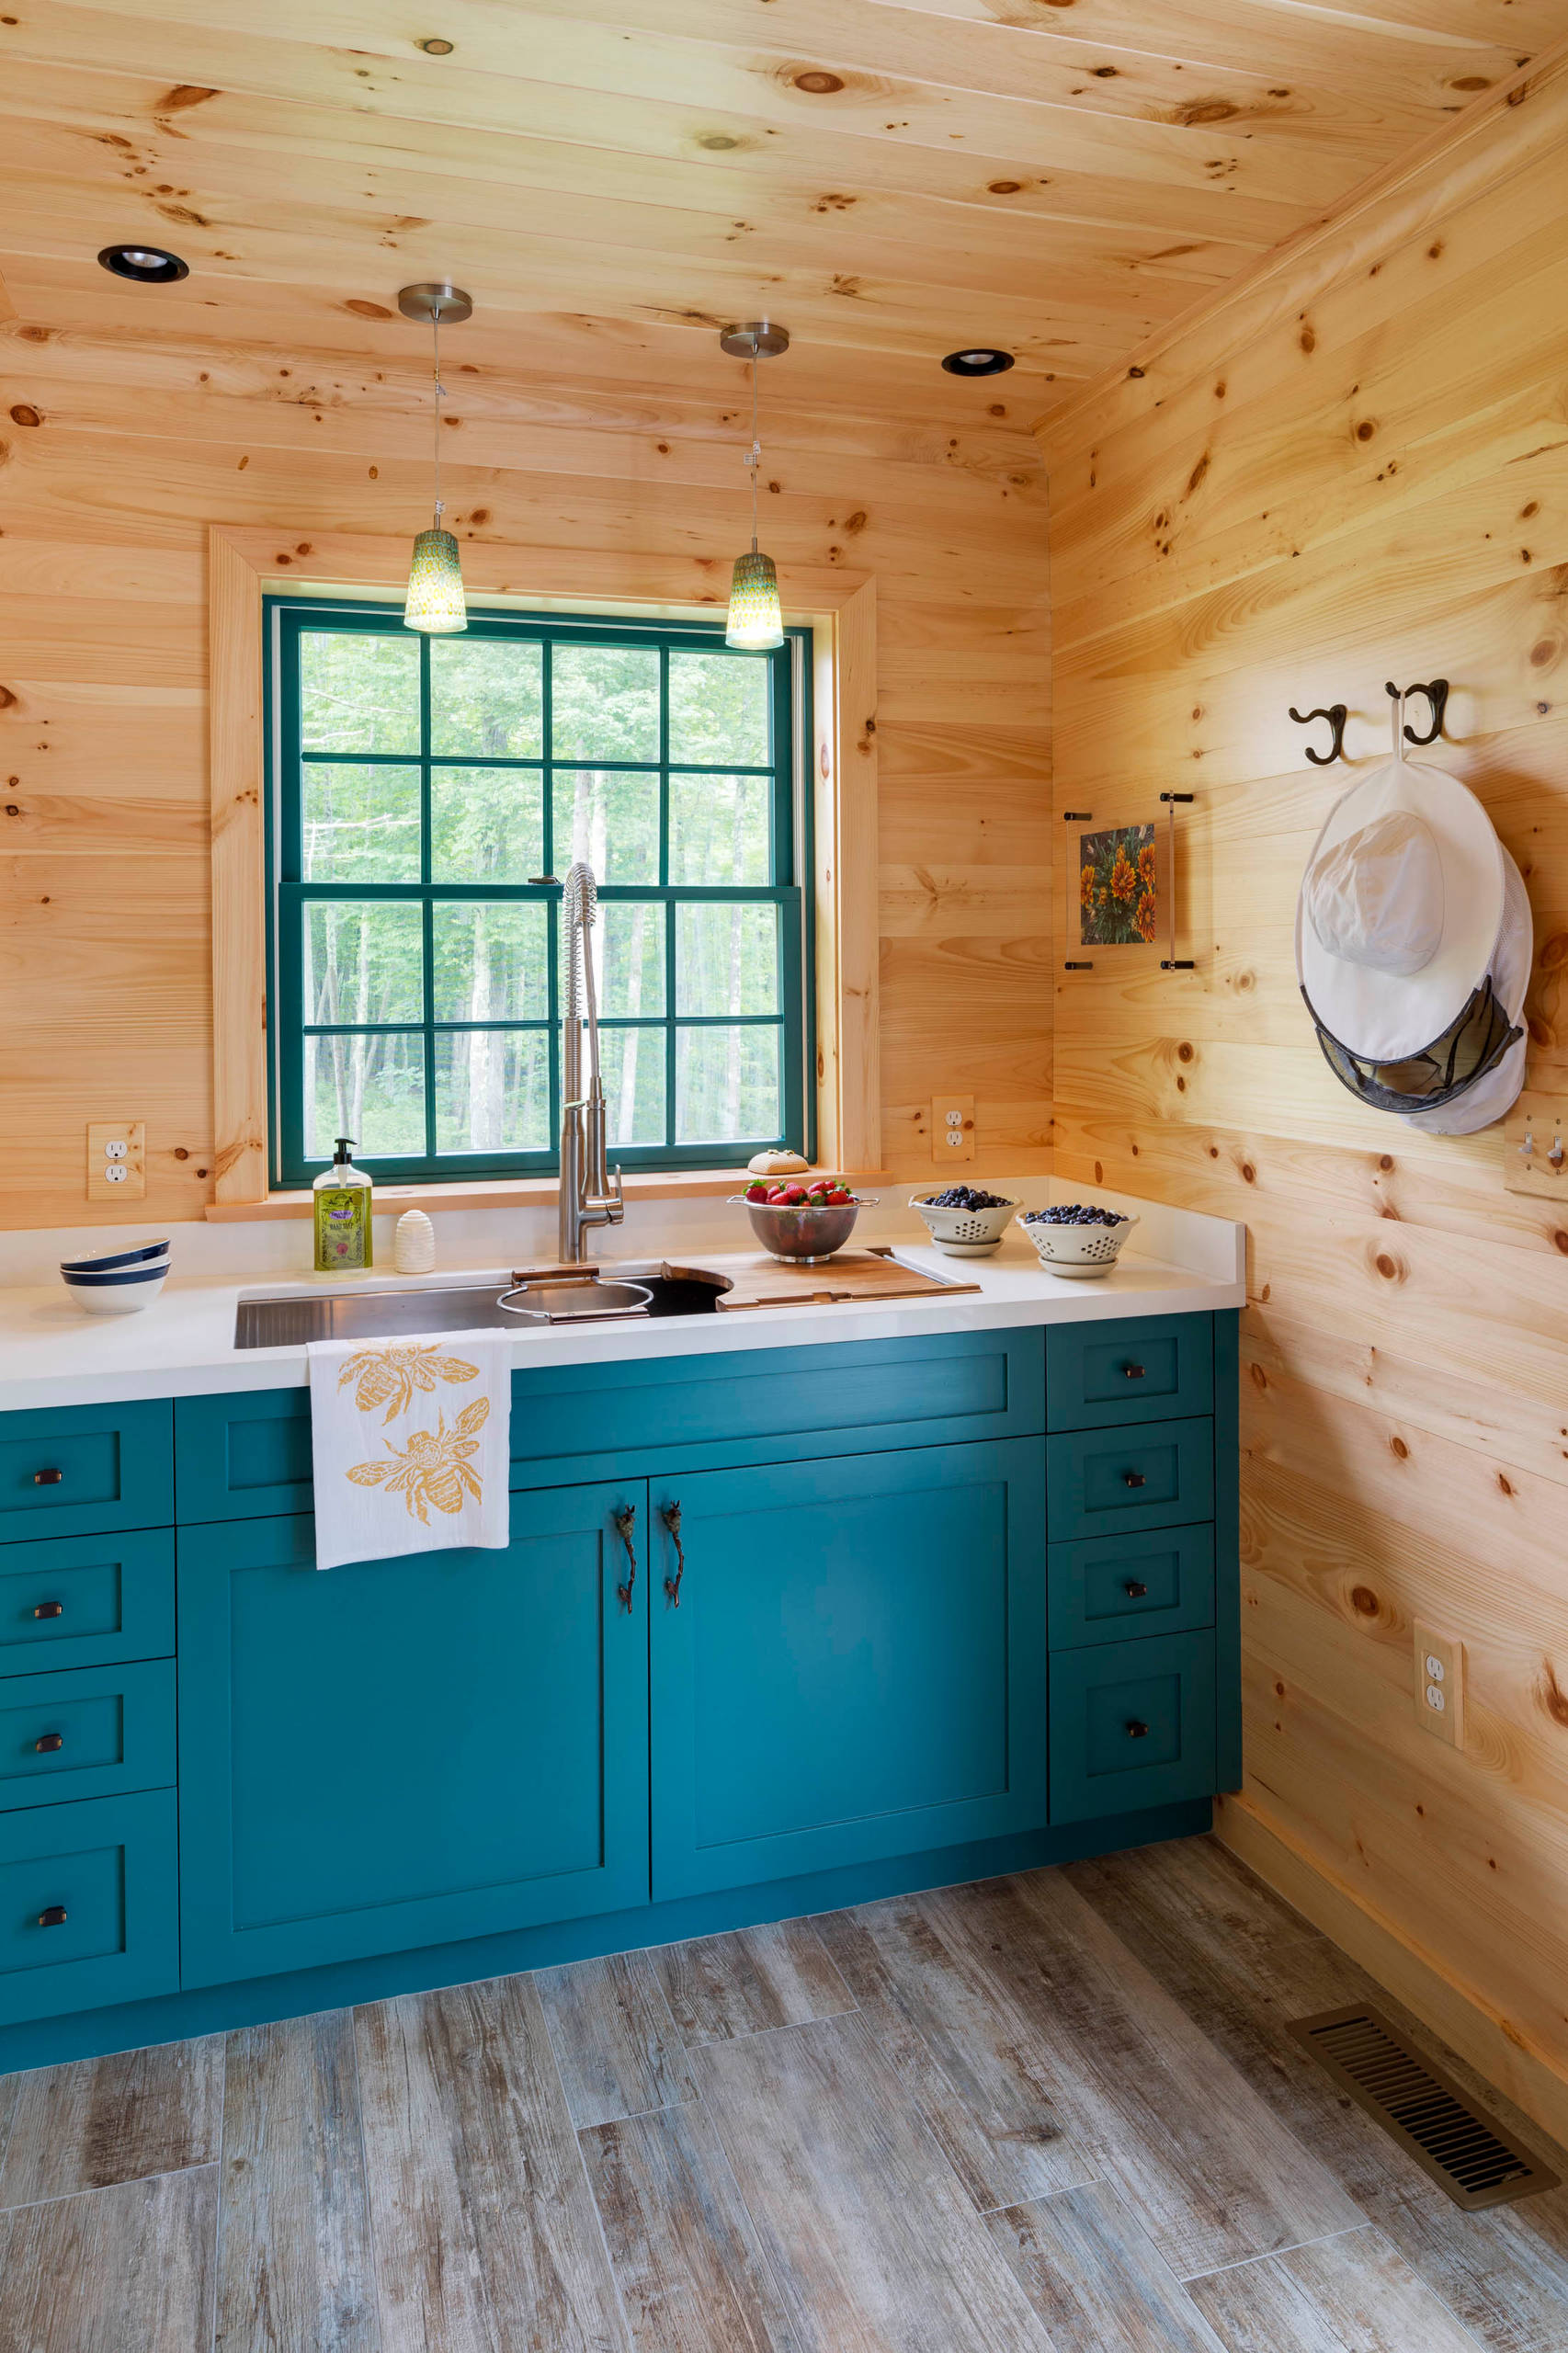 75 Rustic Turquoise Kitchen Ideas You'll Love - February, 2023 | Houzz